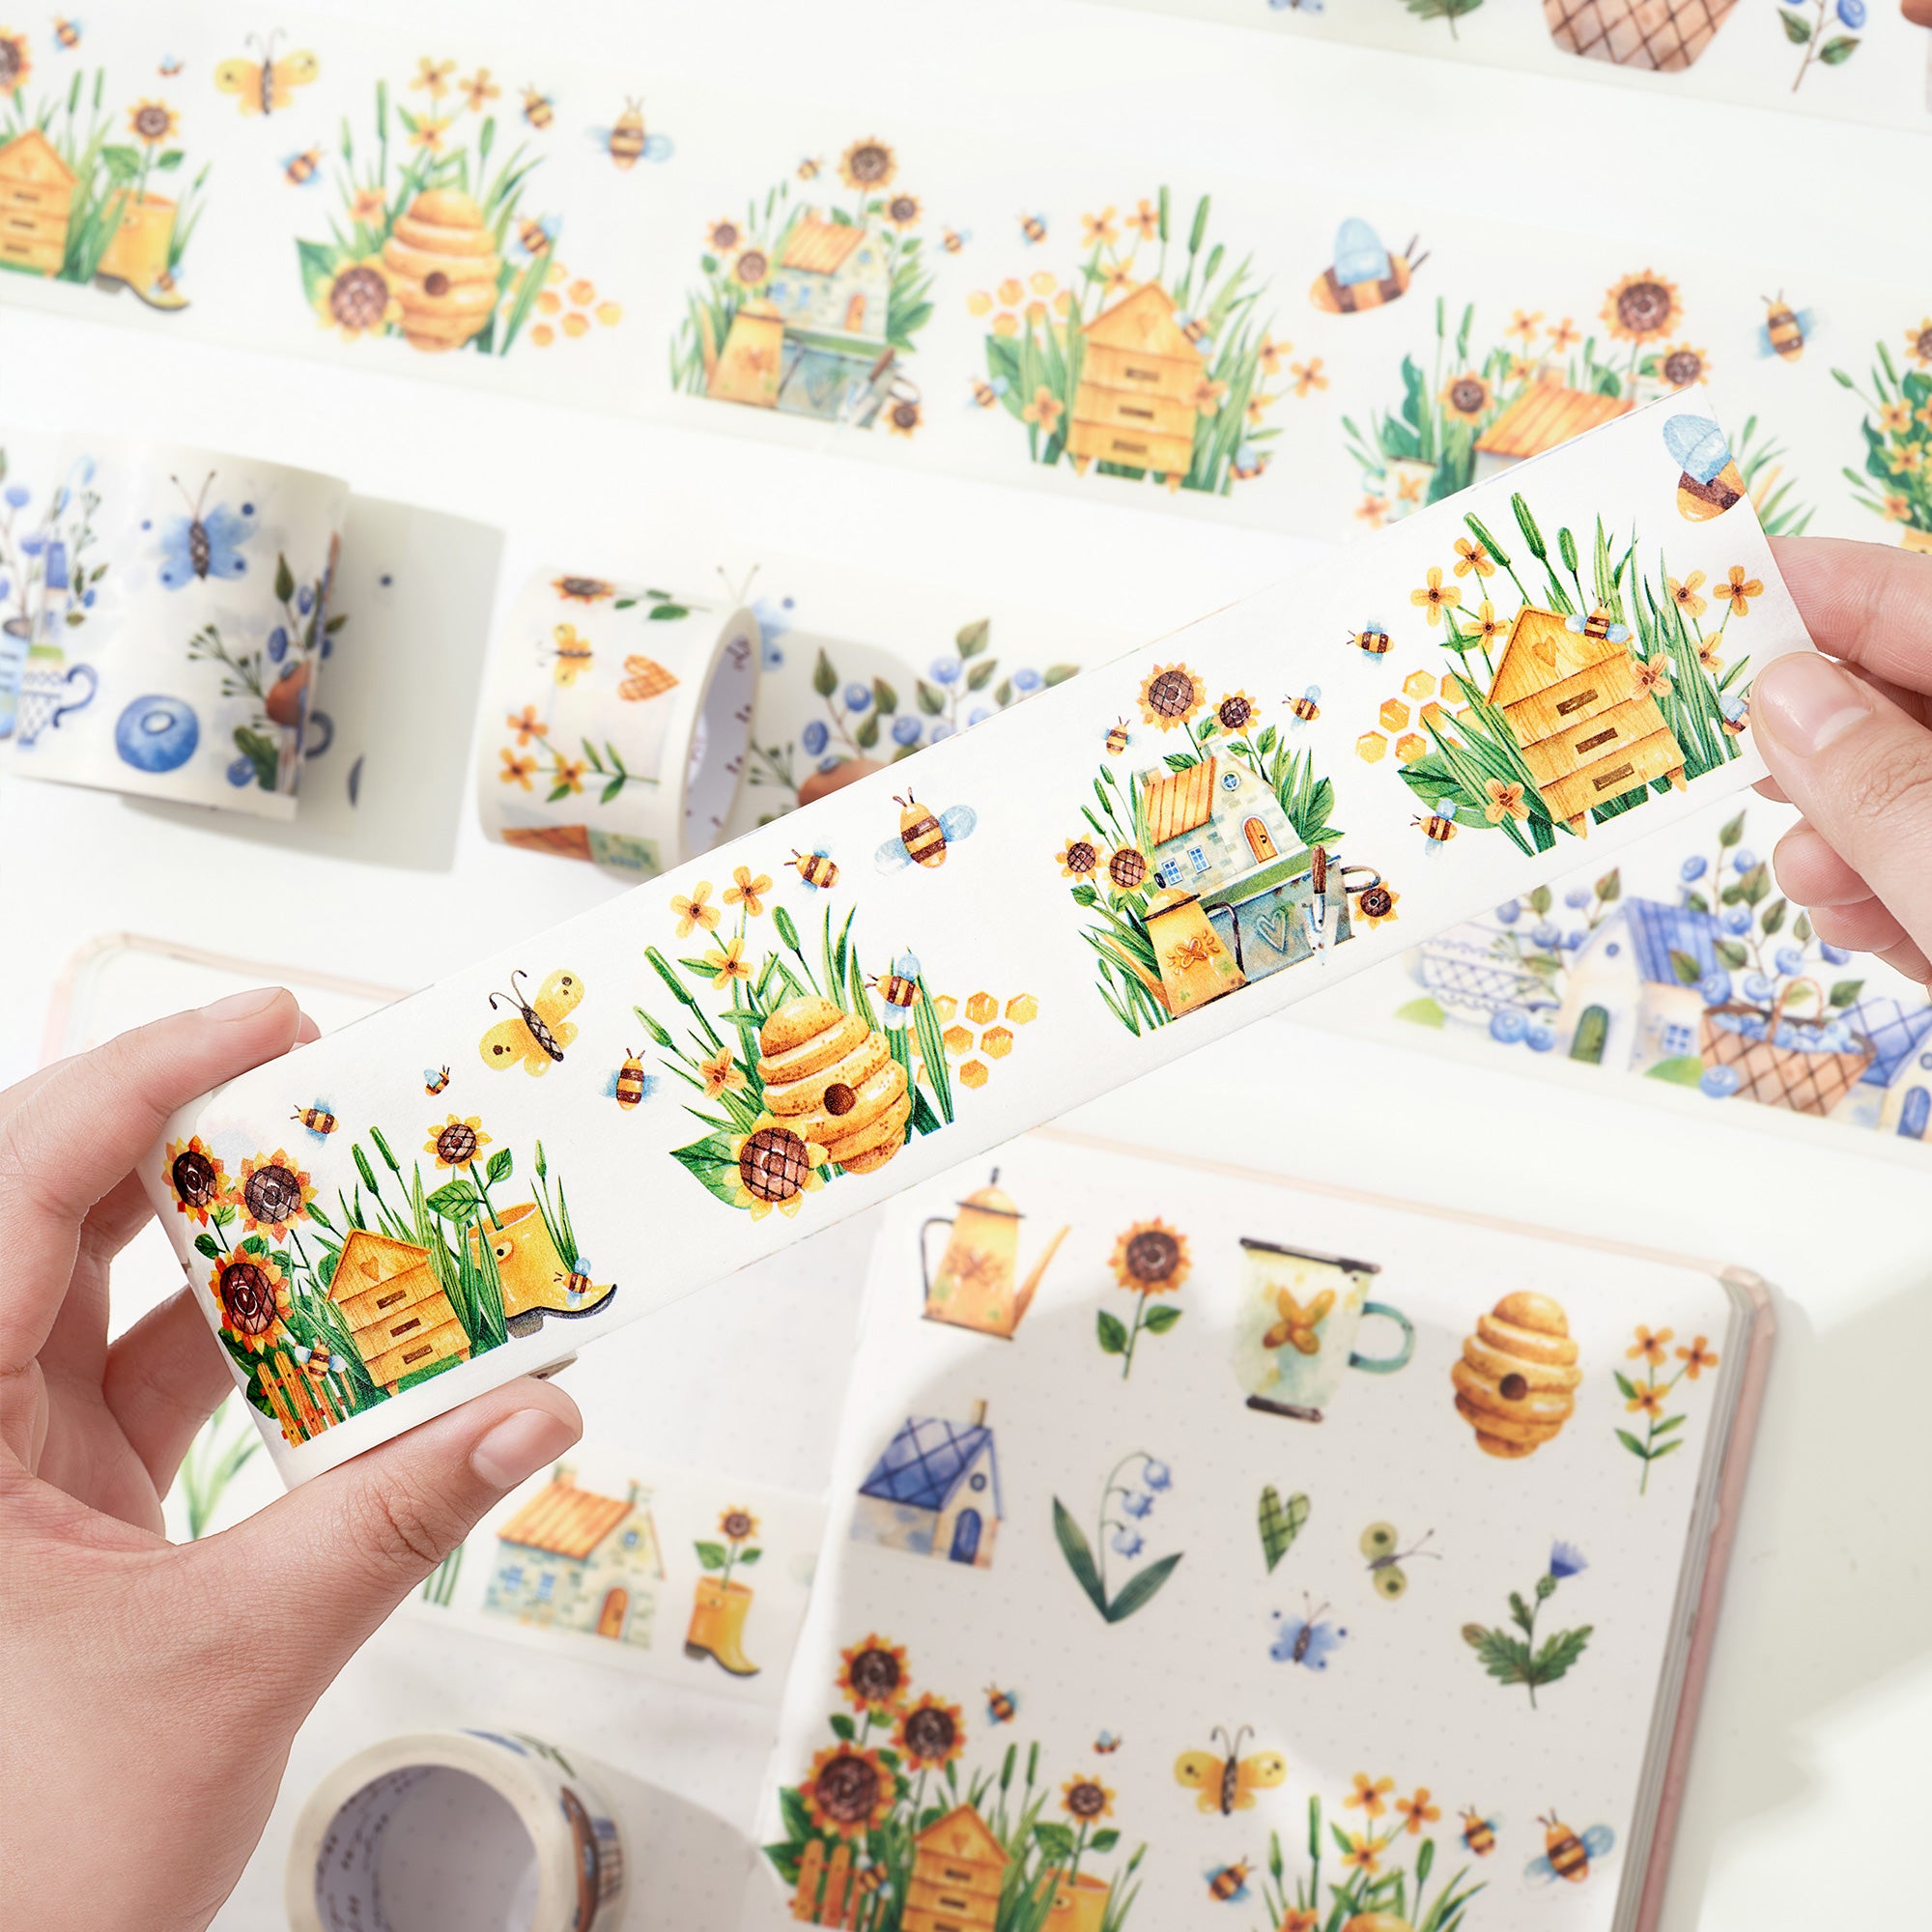 Misty Haven Washi Tape Sticker Set | The Washi Tape Shop. Beautiful Washi and Decorative Tape For Bullet Journals, Gift Wrapping, Planner Decoration and DIY Projects